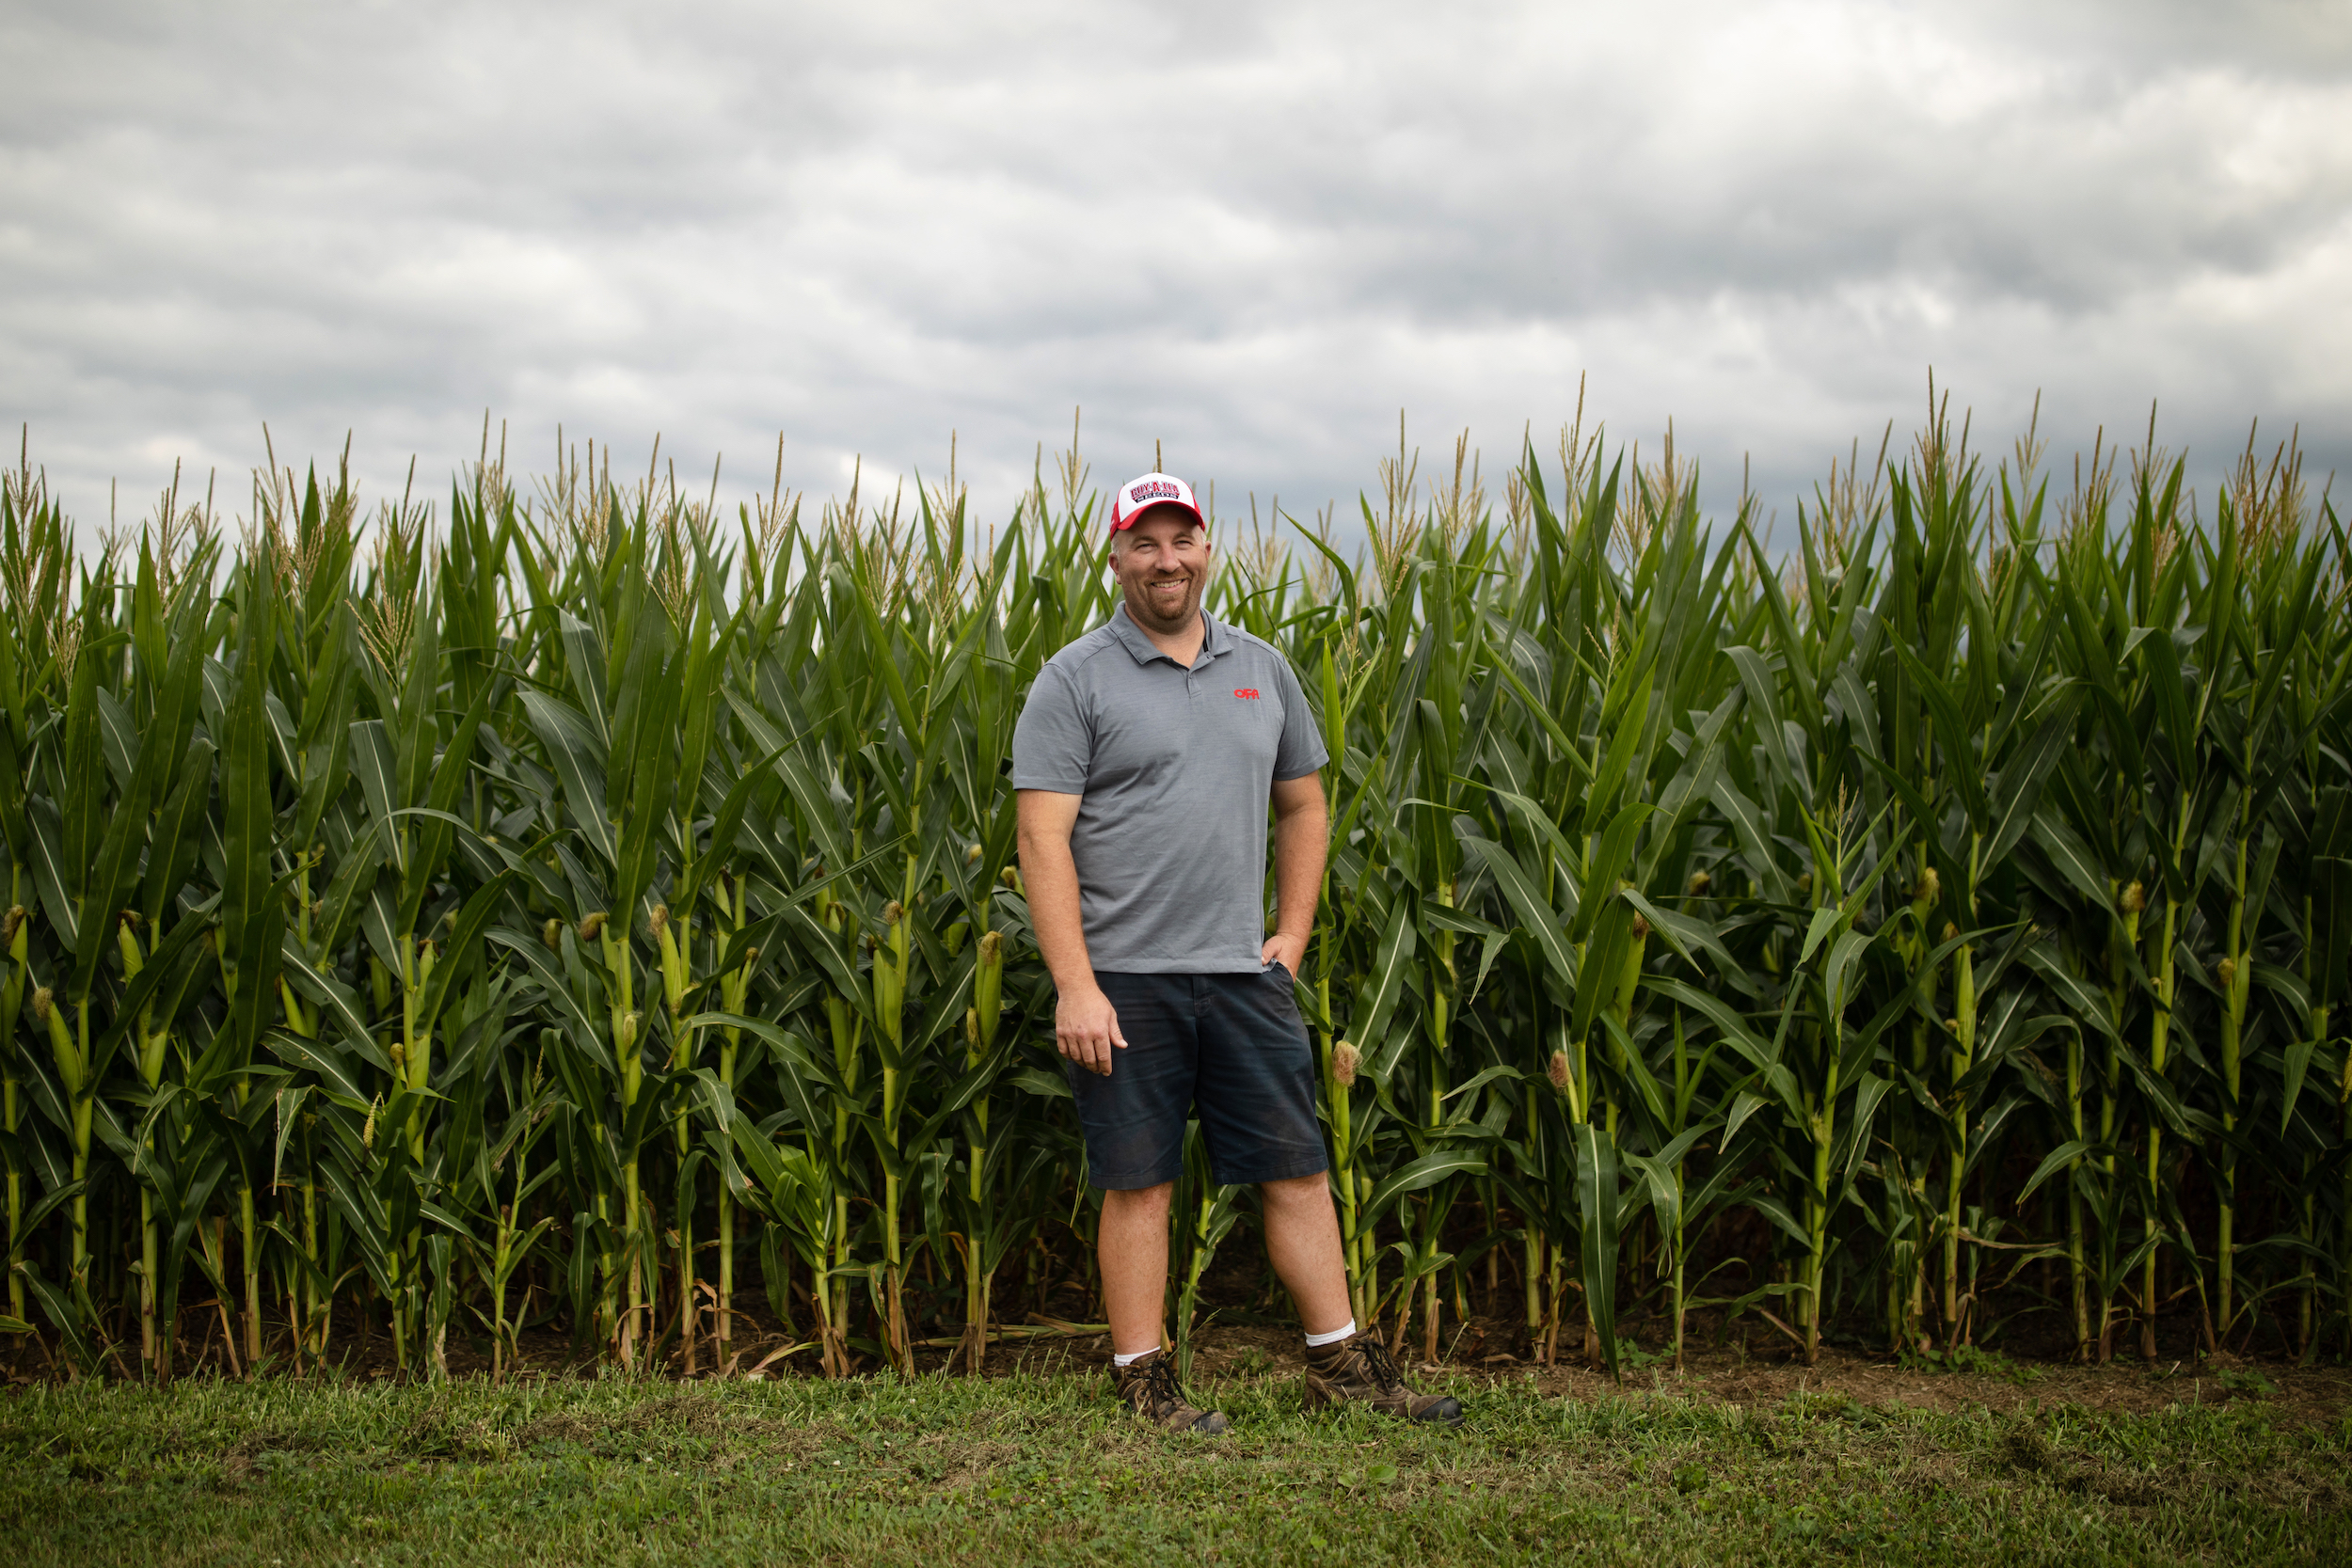 Drew Spoelstra stands in a corn field on his farm in Binbrook, Ontario, Tuesday, August 9, 2022.